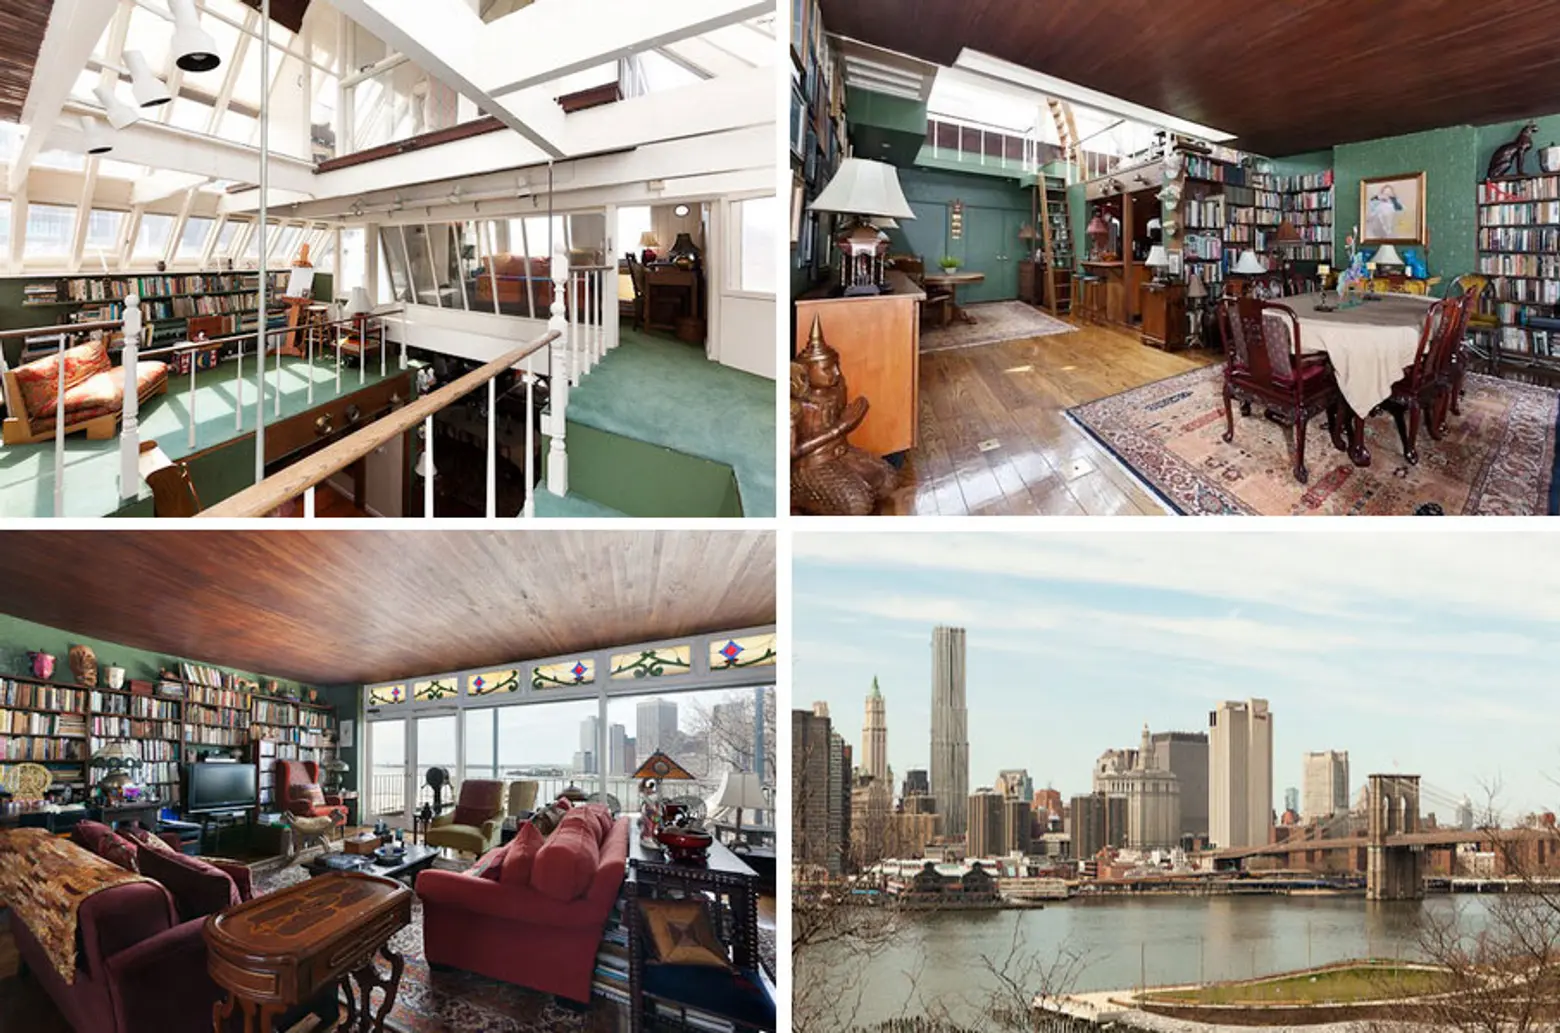 norman mailer penthouse nyc, norman mailer home, penthouse nyc